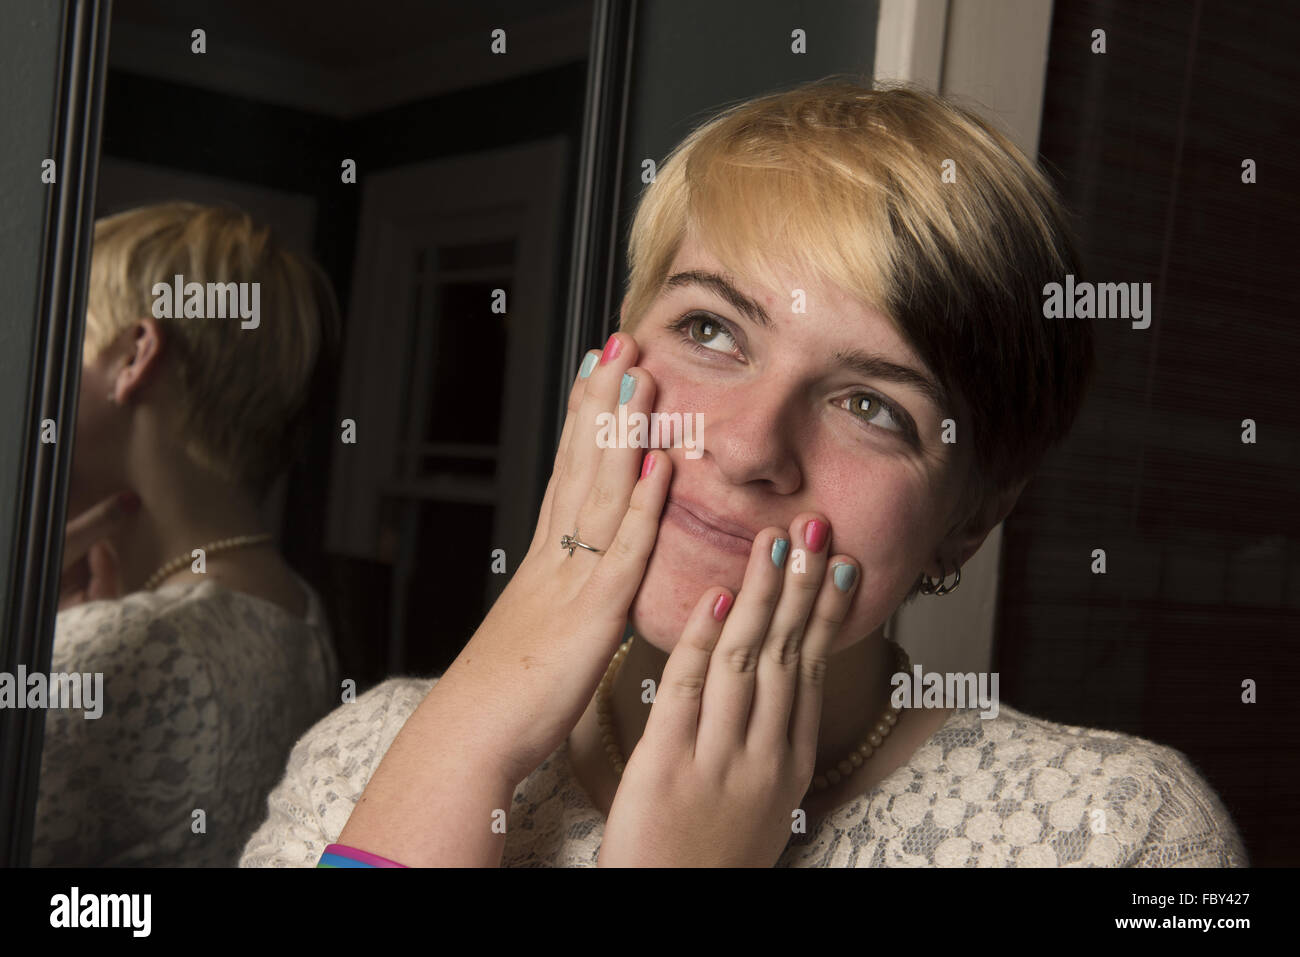 Decatur, Georgia, USA. 1st Jan, 2016. EMMA GRACE KOETTER displays her self-manicure with colors of the transgender flag. 'Genderqueer' is an umbrella term that describes all non-binary gender identities including agender, genderfluid, third gender, androgyne, and a whole lot more. 'I totally identify as being genderqueer, ' she said. (Credit Image: © Robin Rayne Nelson/zReportage.com via ZUMA Press) Stock Photo